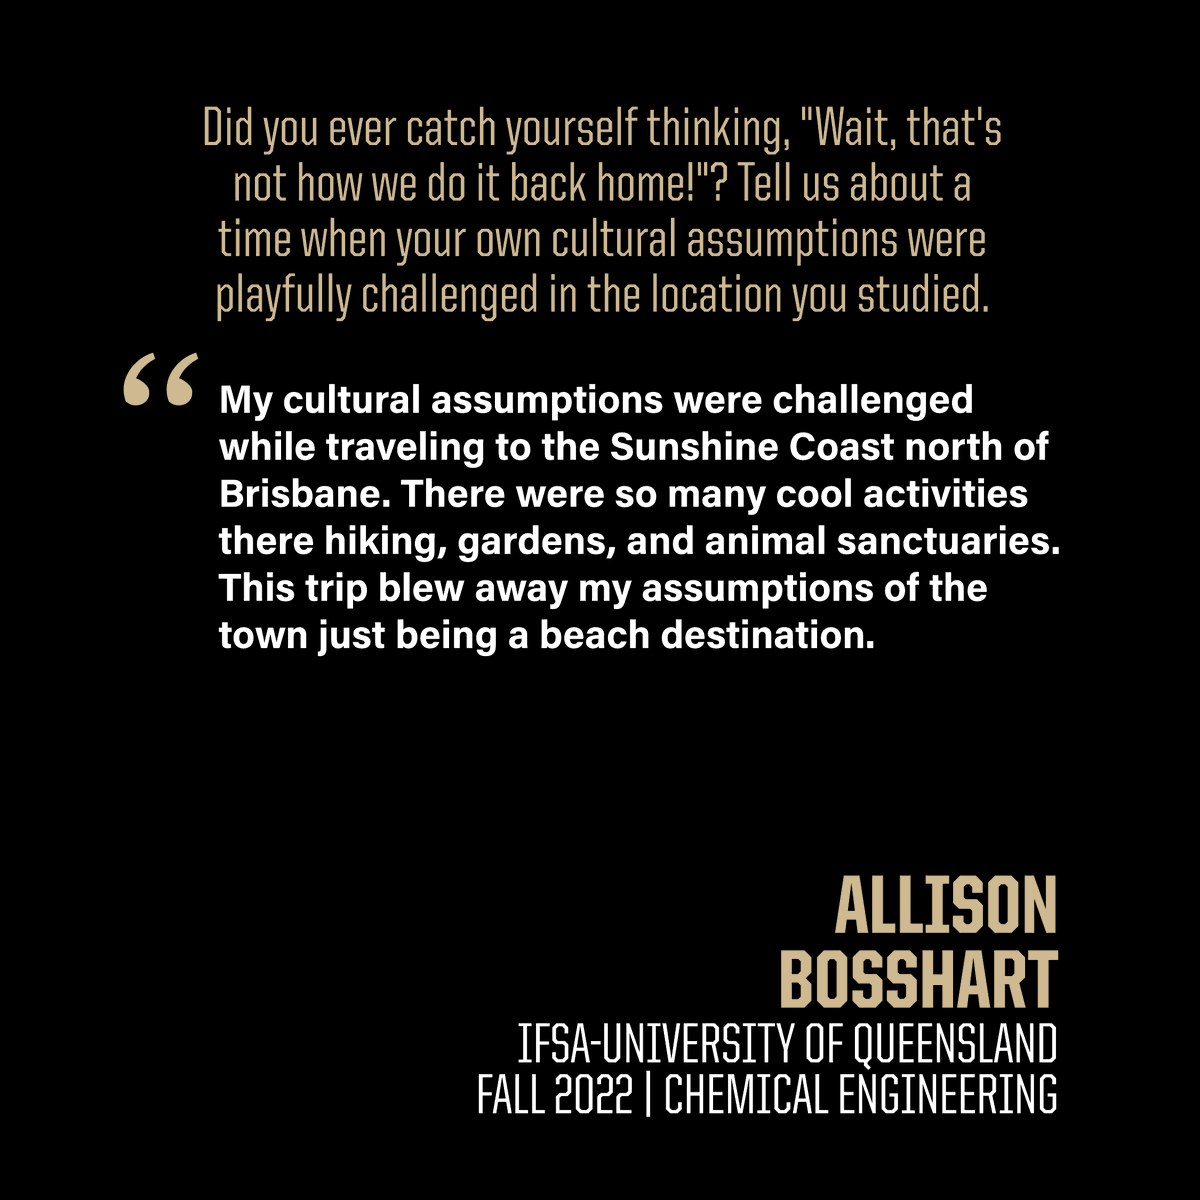 Allison Bosshart is a senior in @purduecheme who studied abroad in Queensland, Australia. Read more about her about her time abroad on our Instagram! #purduecheme #purduechemicalengineering #boilersabroad #PurdueGEPP #universityofqueensland #studyabroad